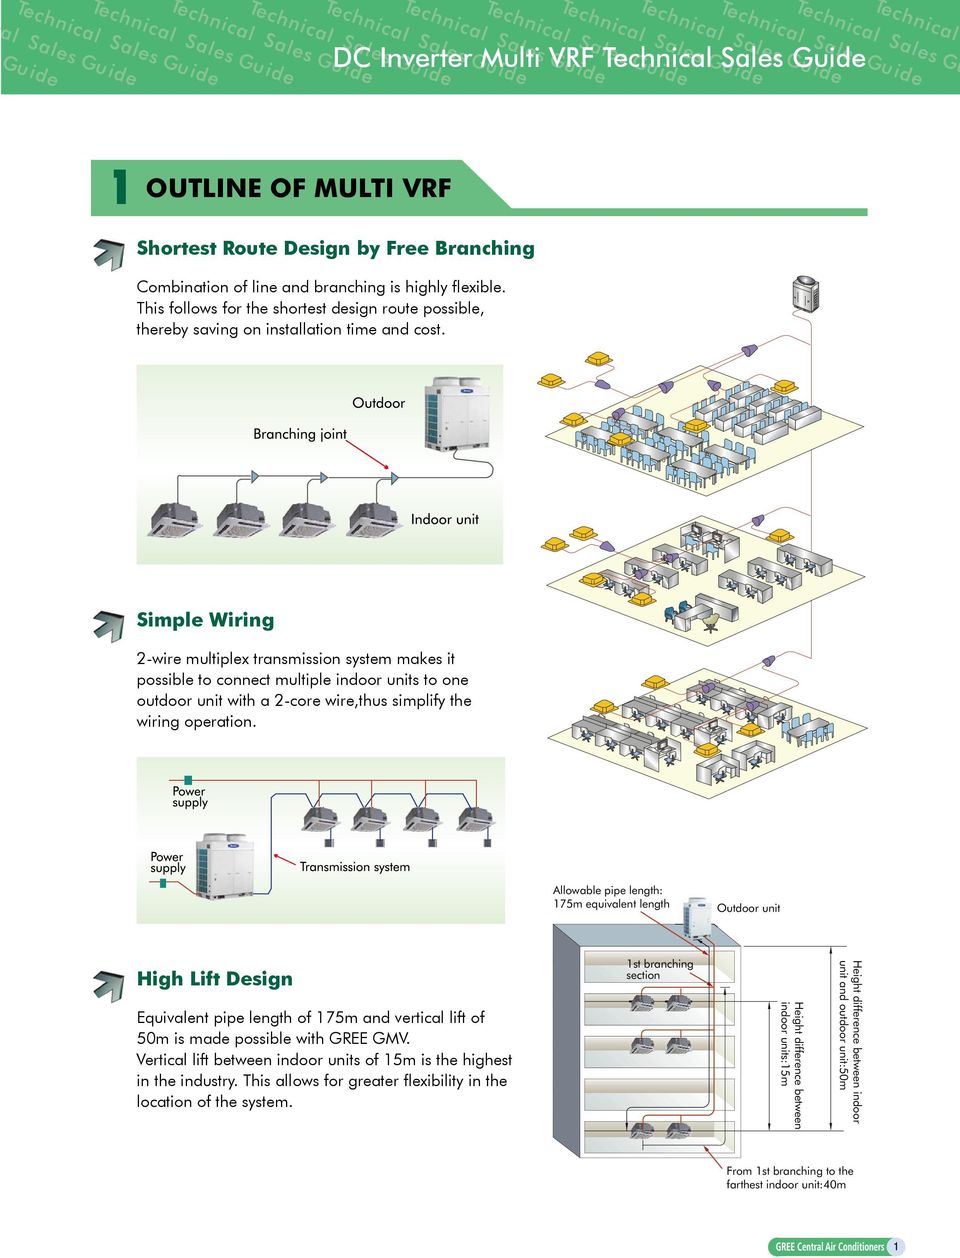 Simple Wiring 2-wire multiplex transmission system makes it possible to connect multiple indoor units to one outdoor unit with a 2-core wire,thus simplify the wiring operation.